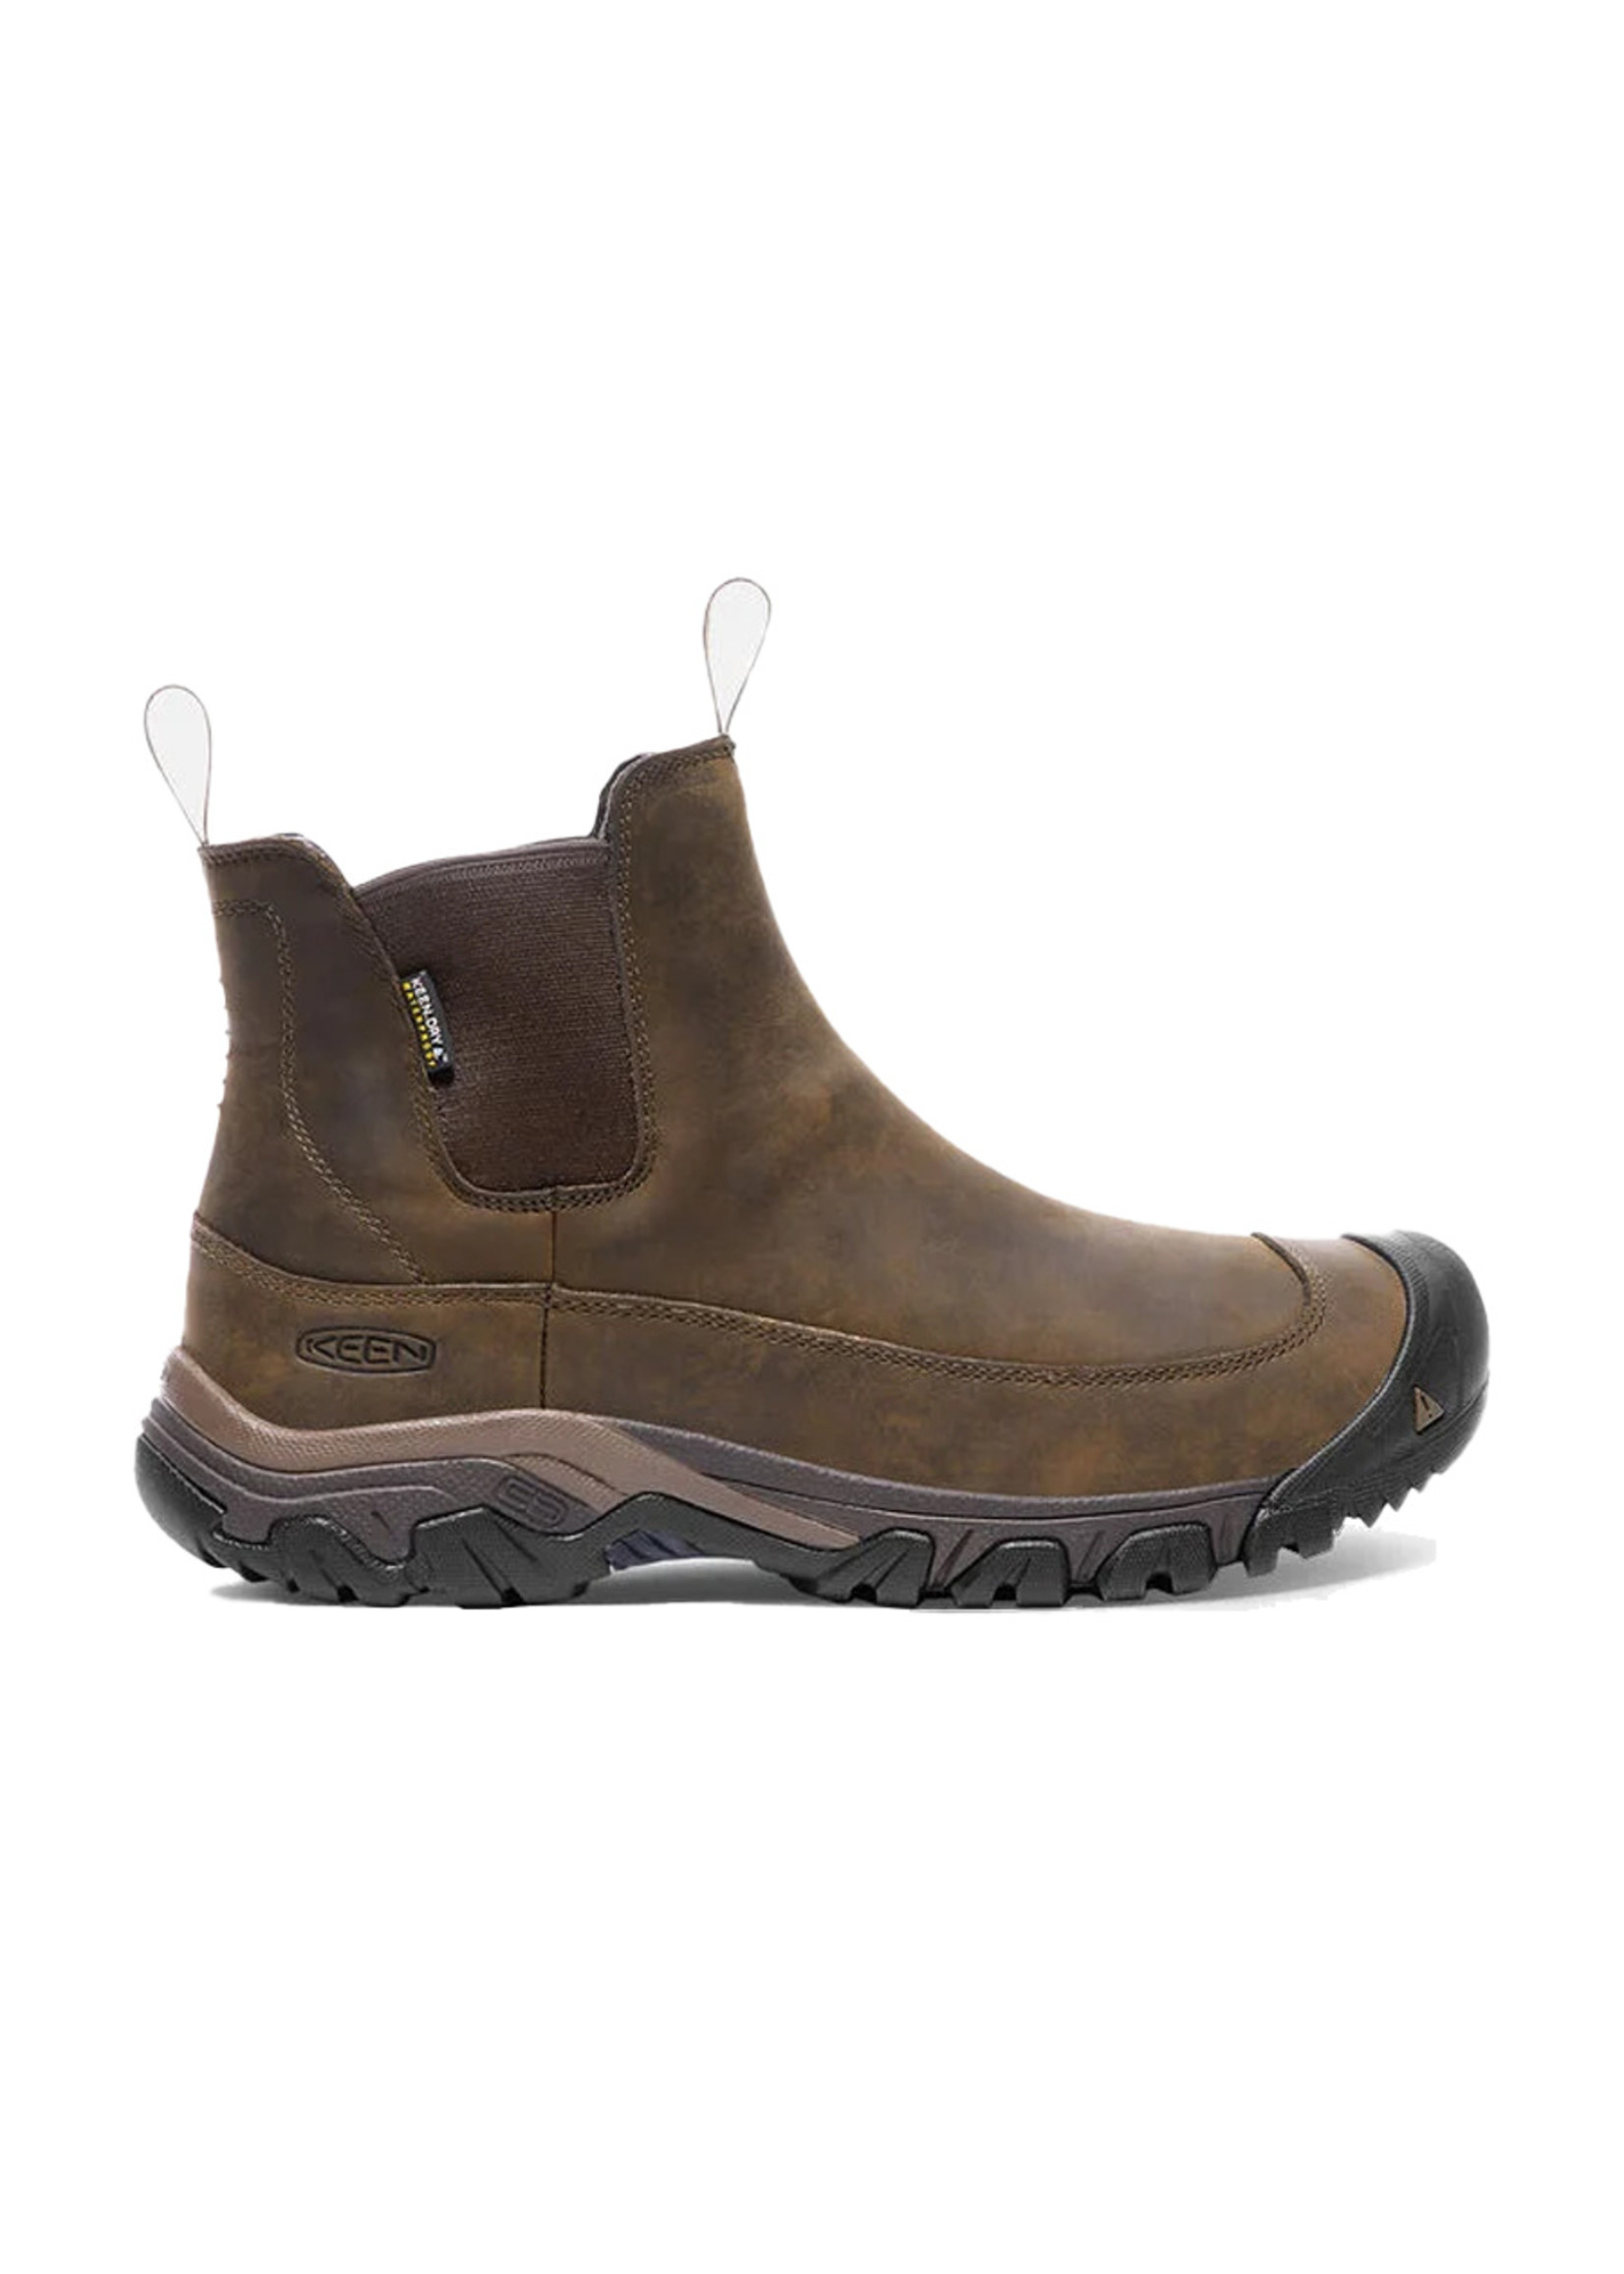 KEEN Bottes imperméables Anchorage III